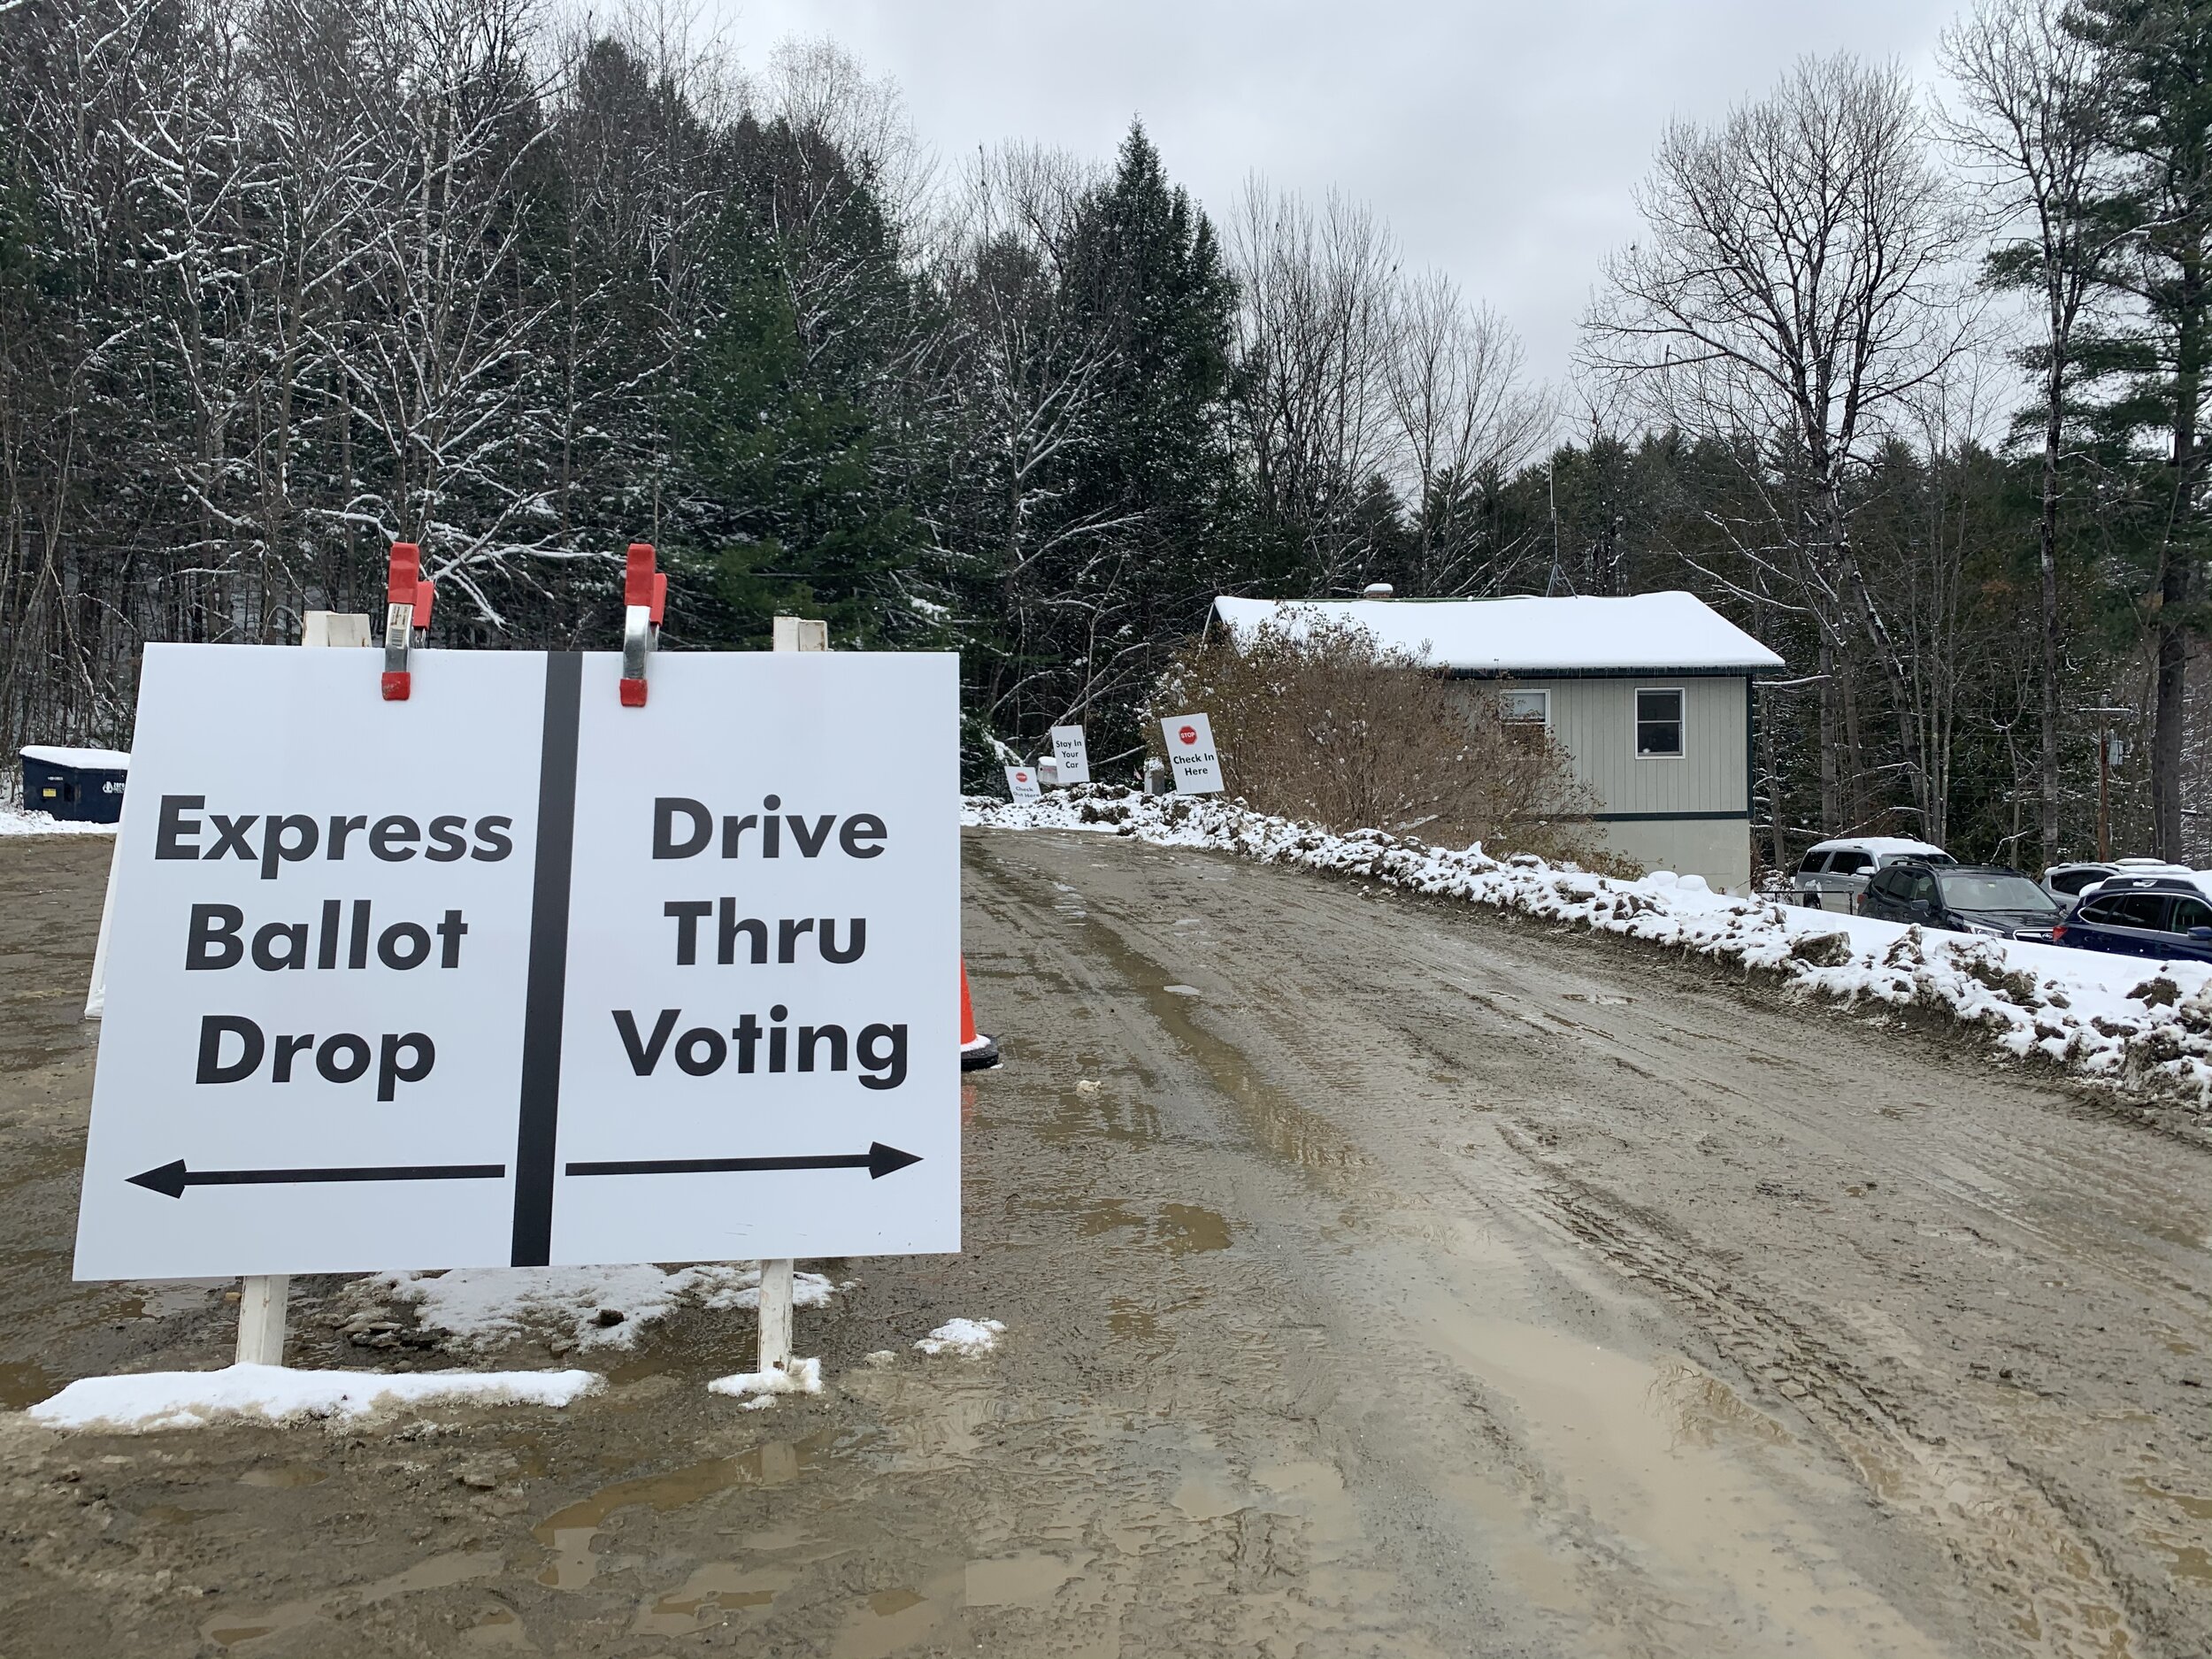   The area outside the Duxbury town office and garage looks like mud season Tuesday after early snowfall melts into mud for drive-thru voting. Photo by Lisa Scagliotti.  